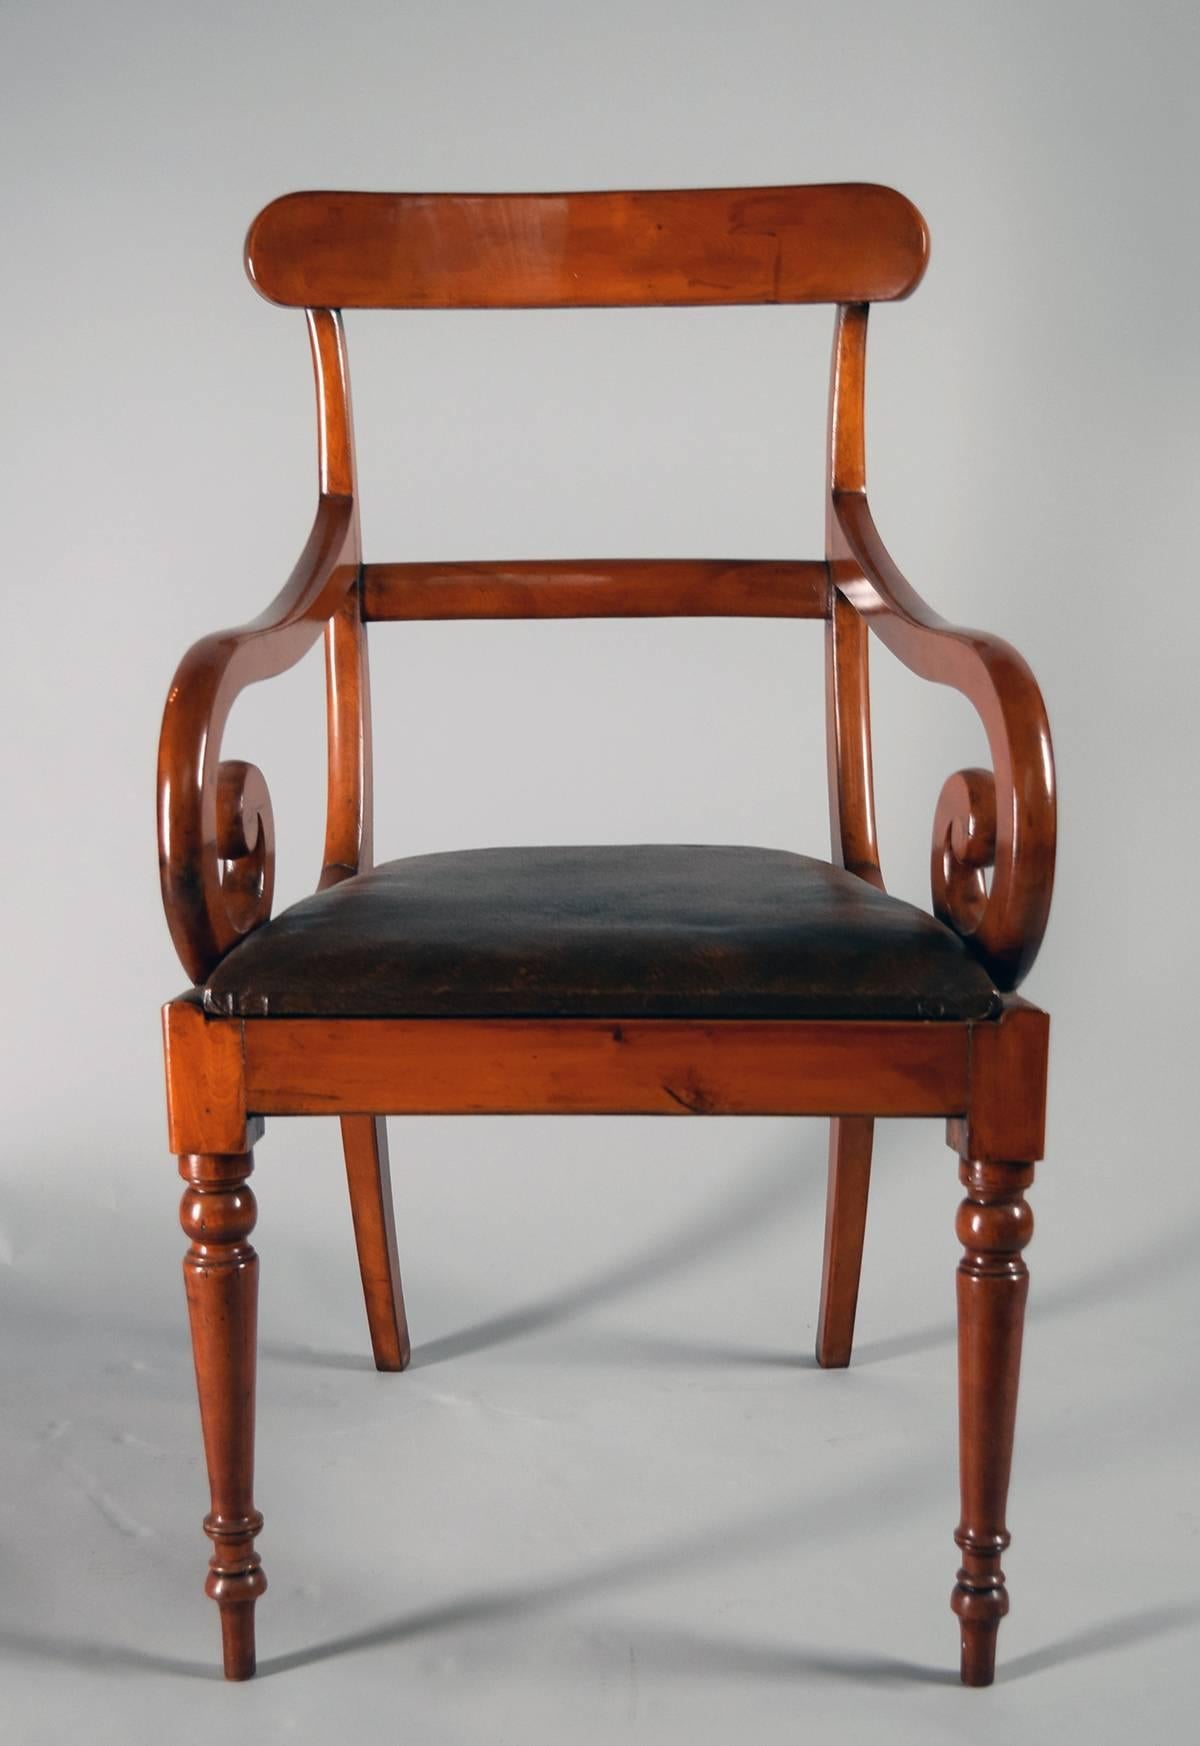 Curved crest rail and splat with sweeping scrolled arms, drop in seat and date, circa 1820.

Provenance: Roundwood Manor, Hunting Valley, Ohio.